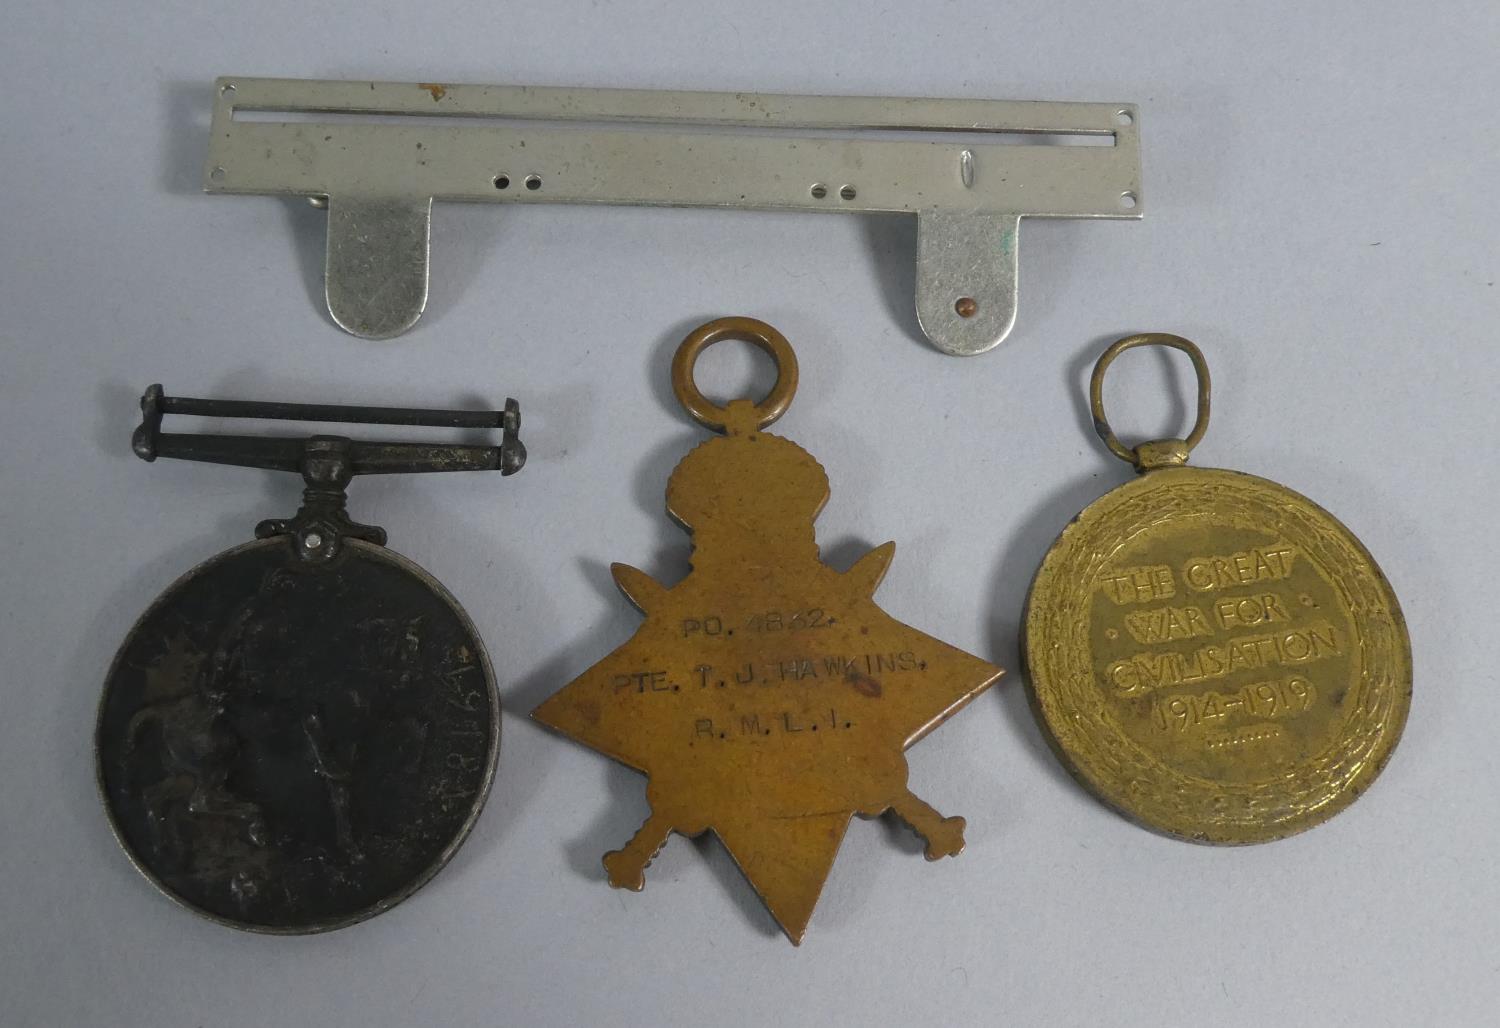 A Collection of Three WWI Medals Awarded to Private T J Hawkins RMLI, no. P04832 - Image 2 of 2